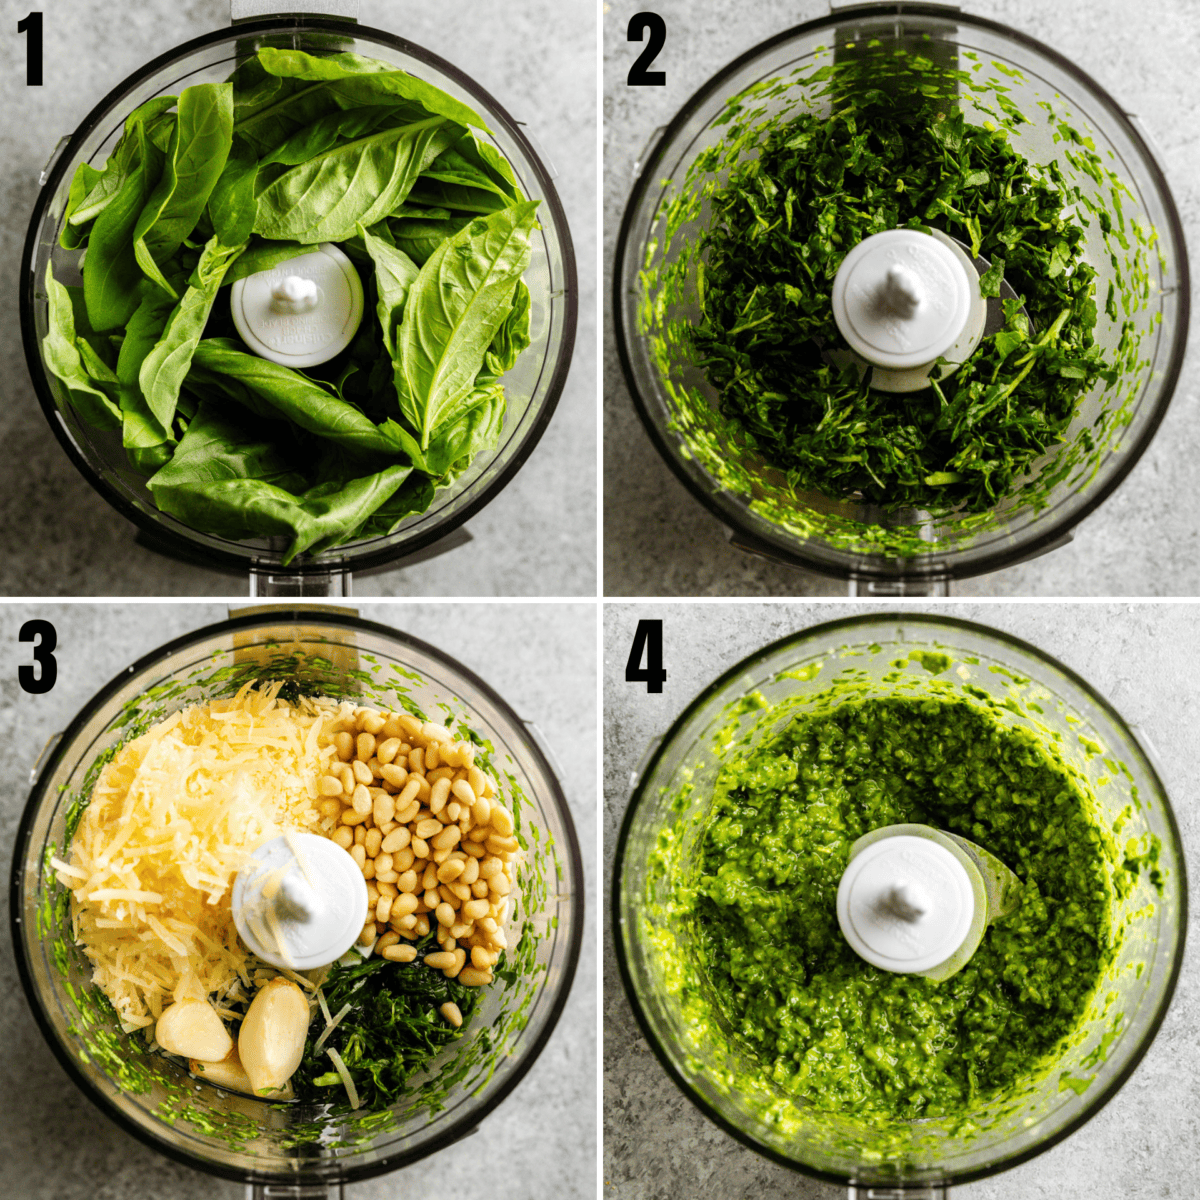 Process shots of the different steps of making simple basil pesto.